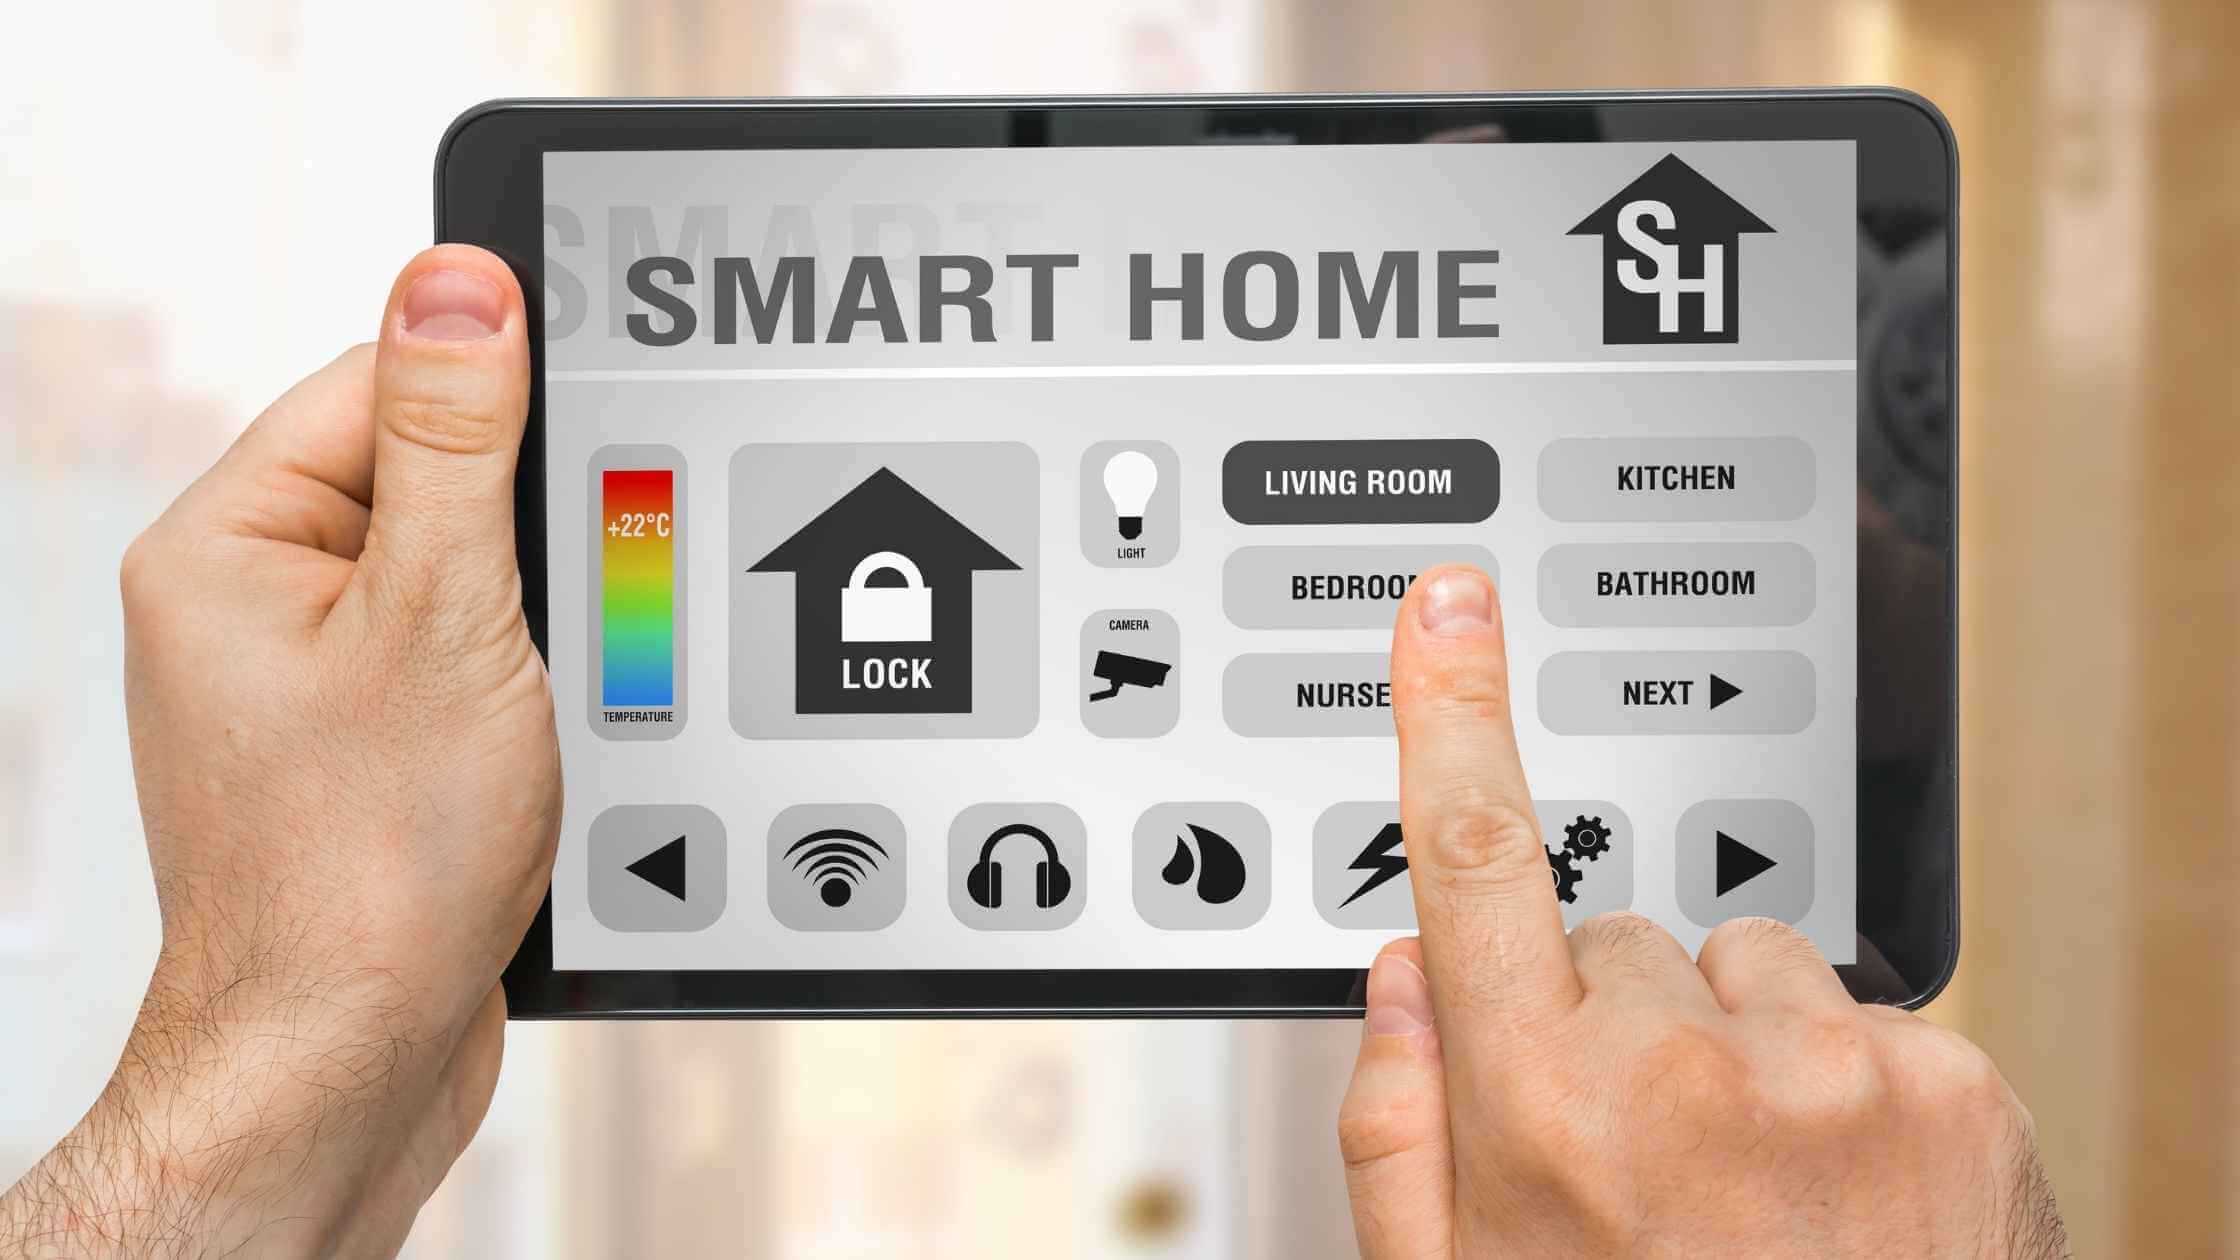 Smart home pros and cons